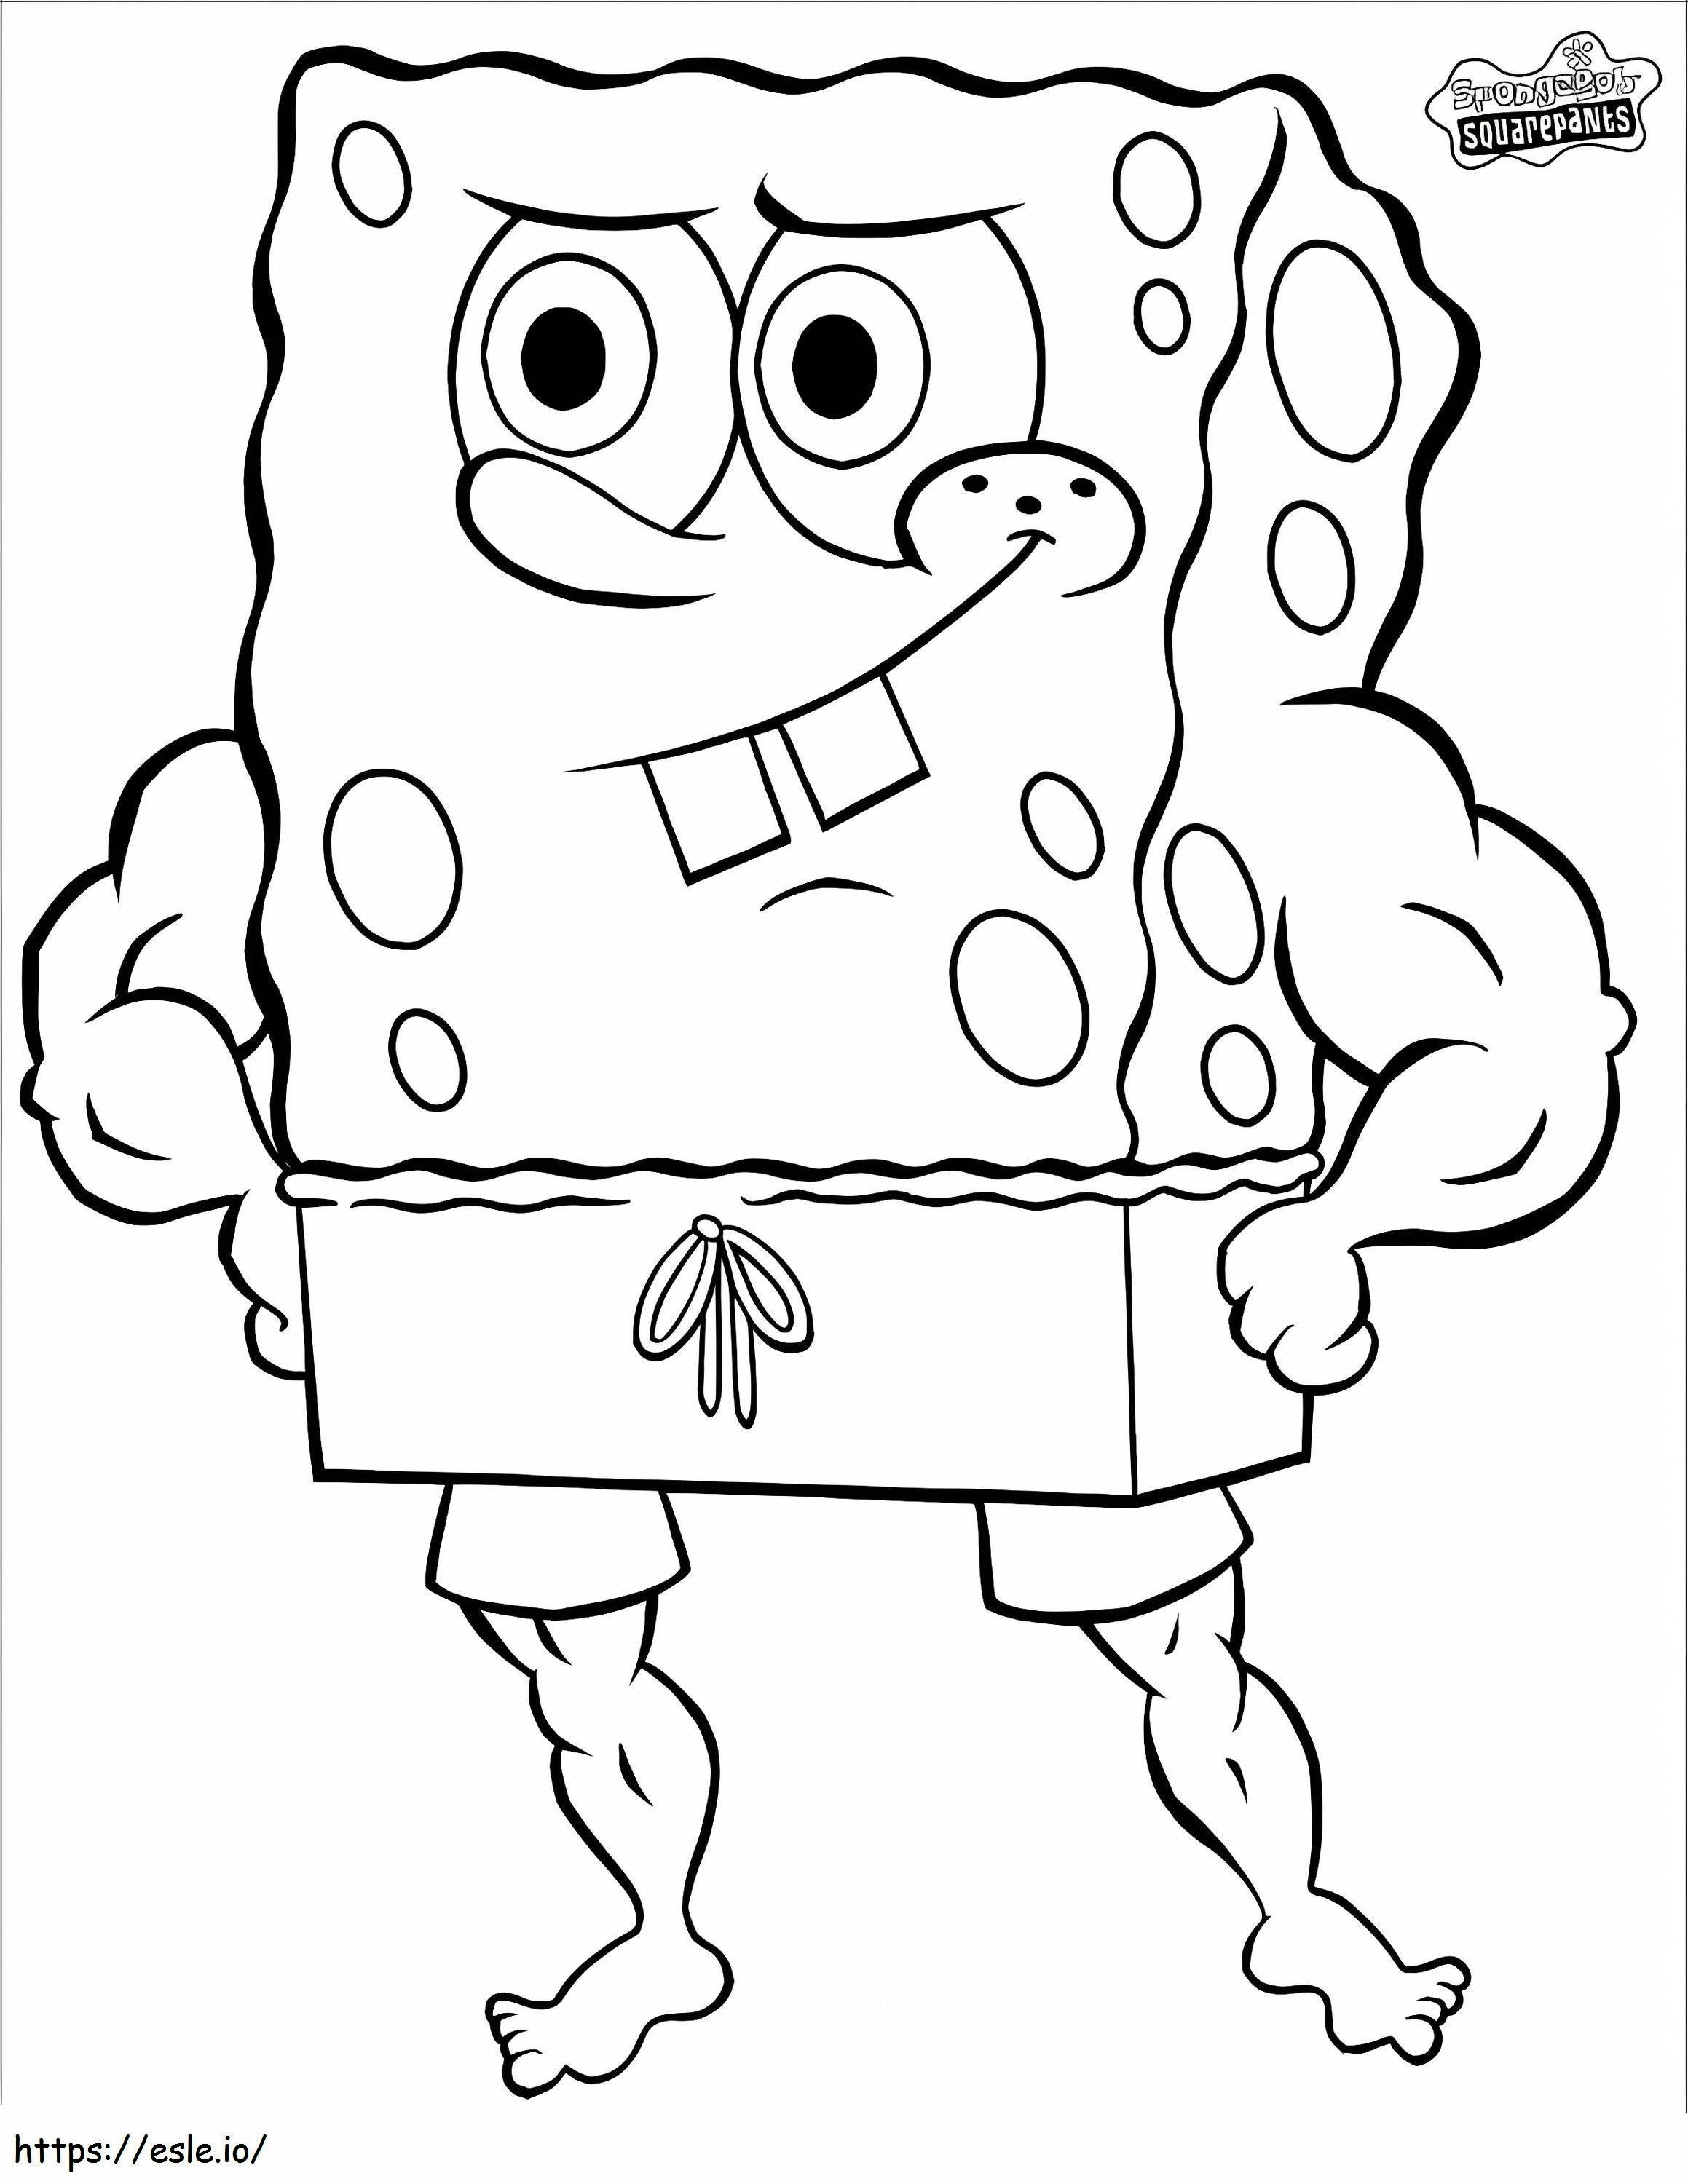 Strong SpongeBob coloring page